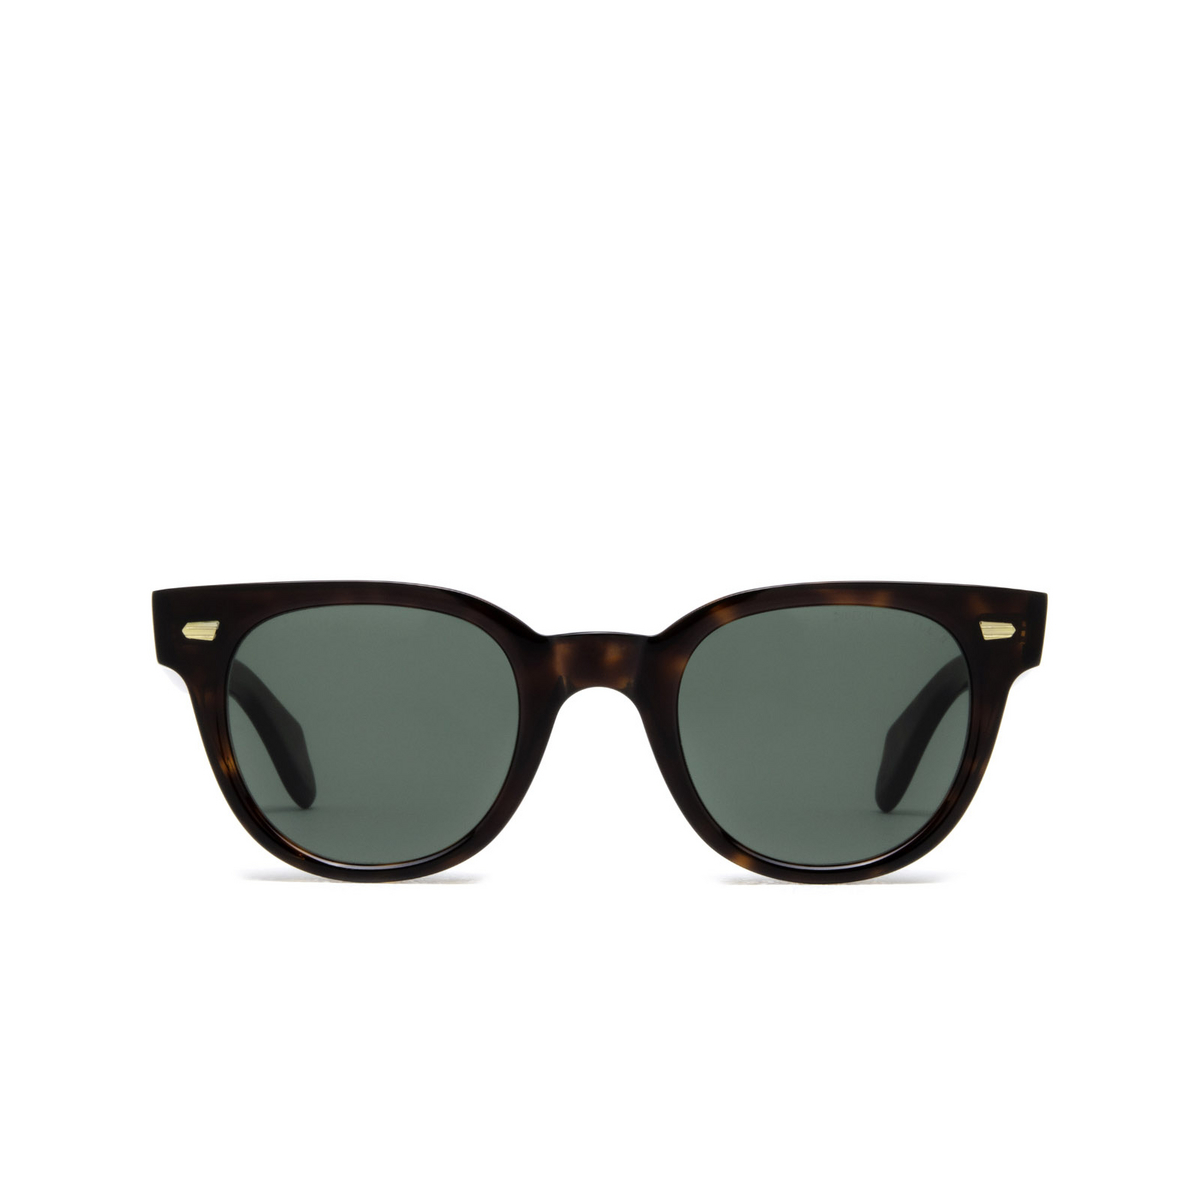 Cutler and Gross 1392 Sunglasses 02 Dark Turtle - front view